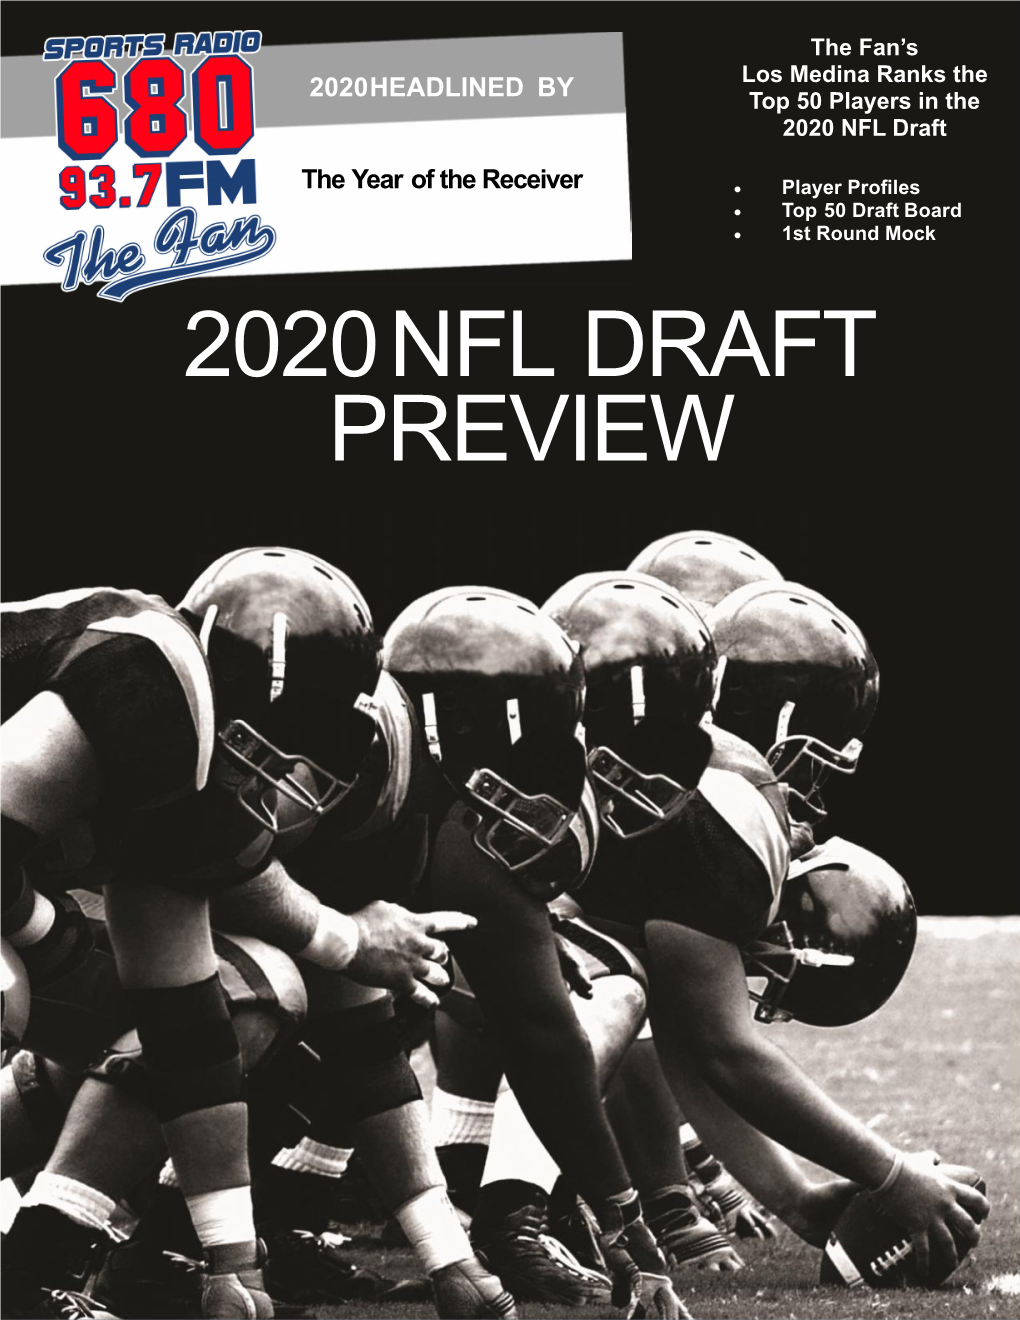 2020NFL DRAFT PREVIEW WELCOME to the 2020 NFL DRAFT by Los Medina